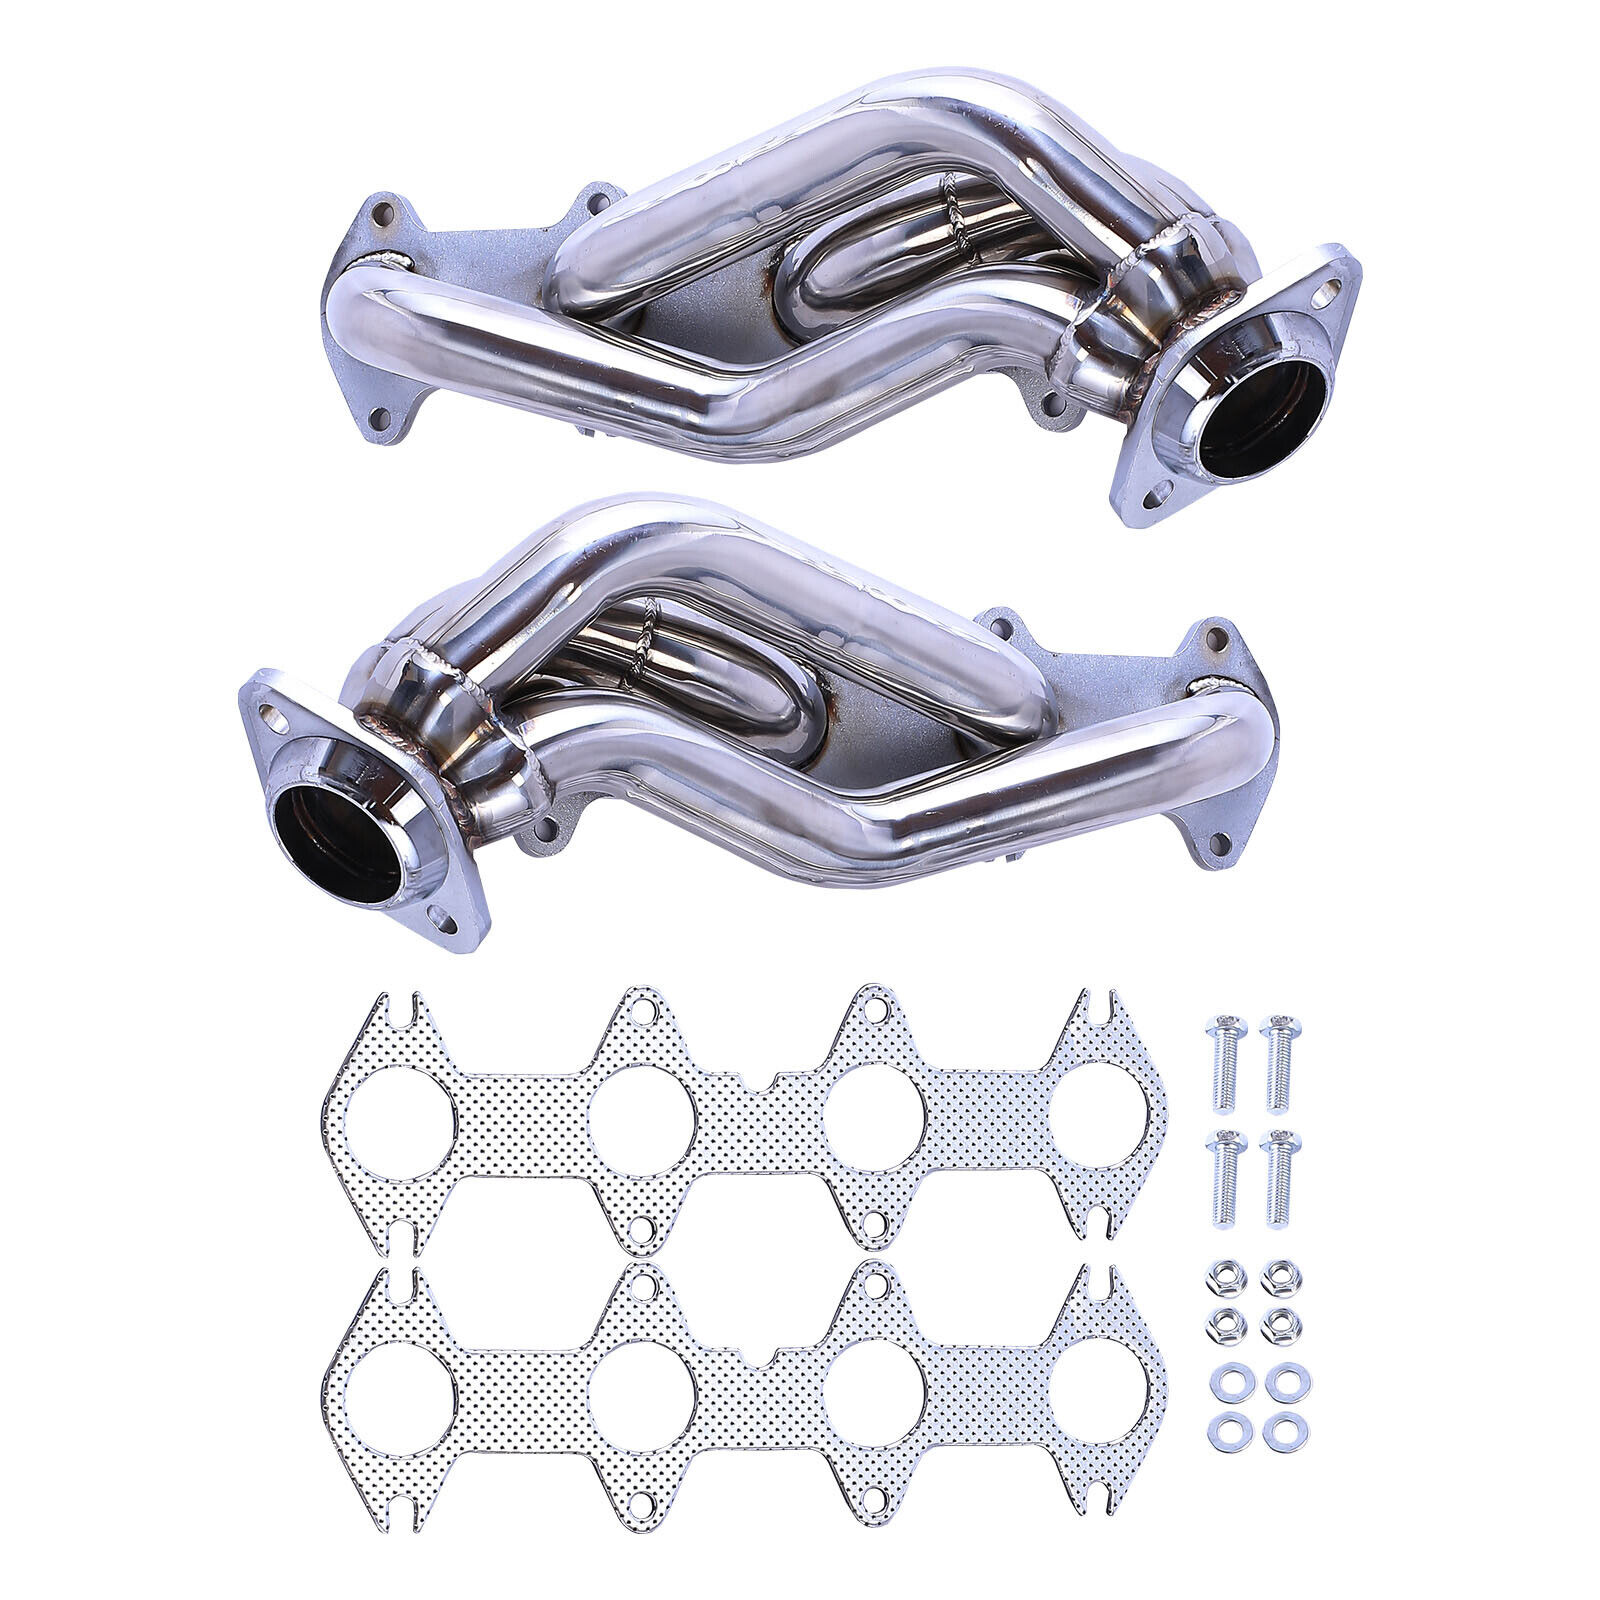 Stainless Steel Shorty Headers Manifold For Ford F150 5.4L V8 2004-2010